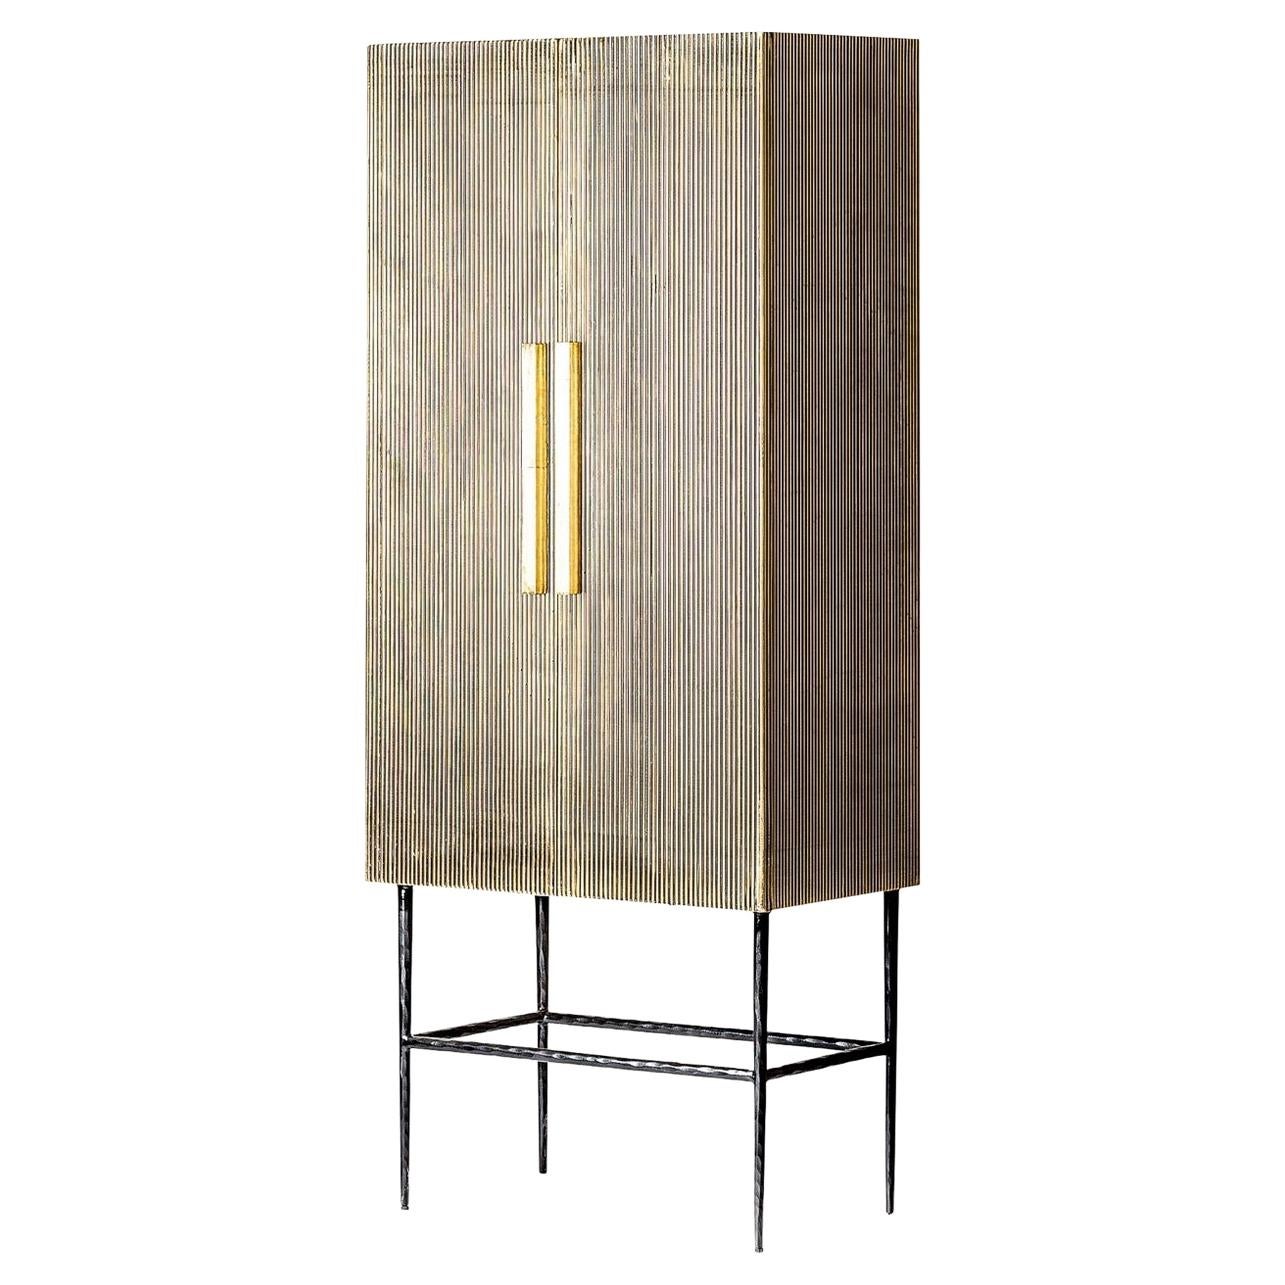 Art Deco and Brutalist Design Style Wooden and Gilded Metal Armoire